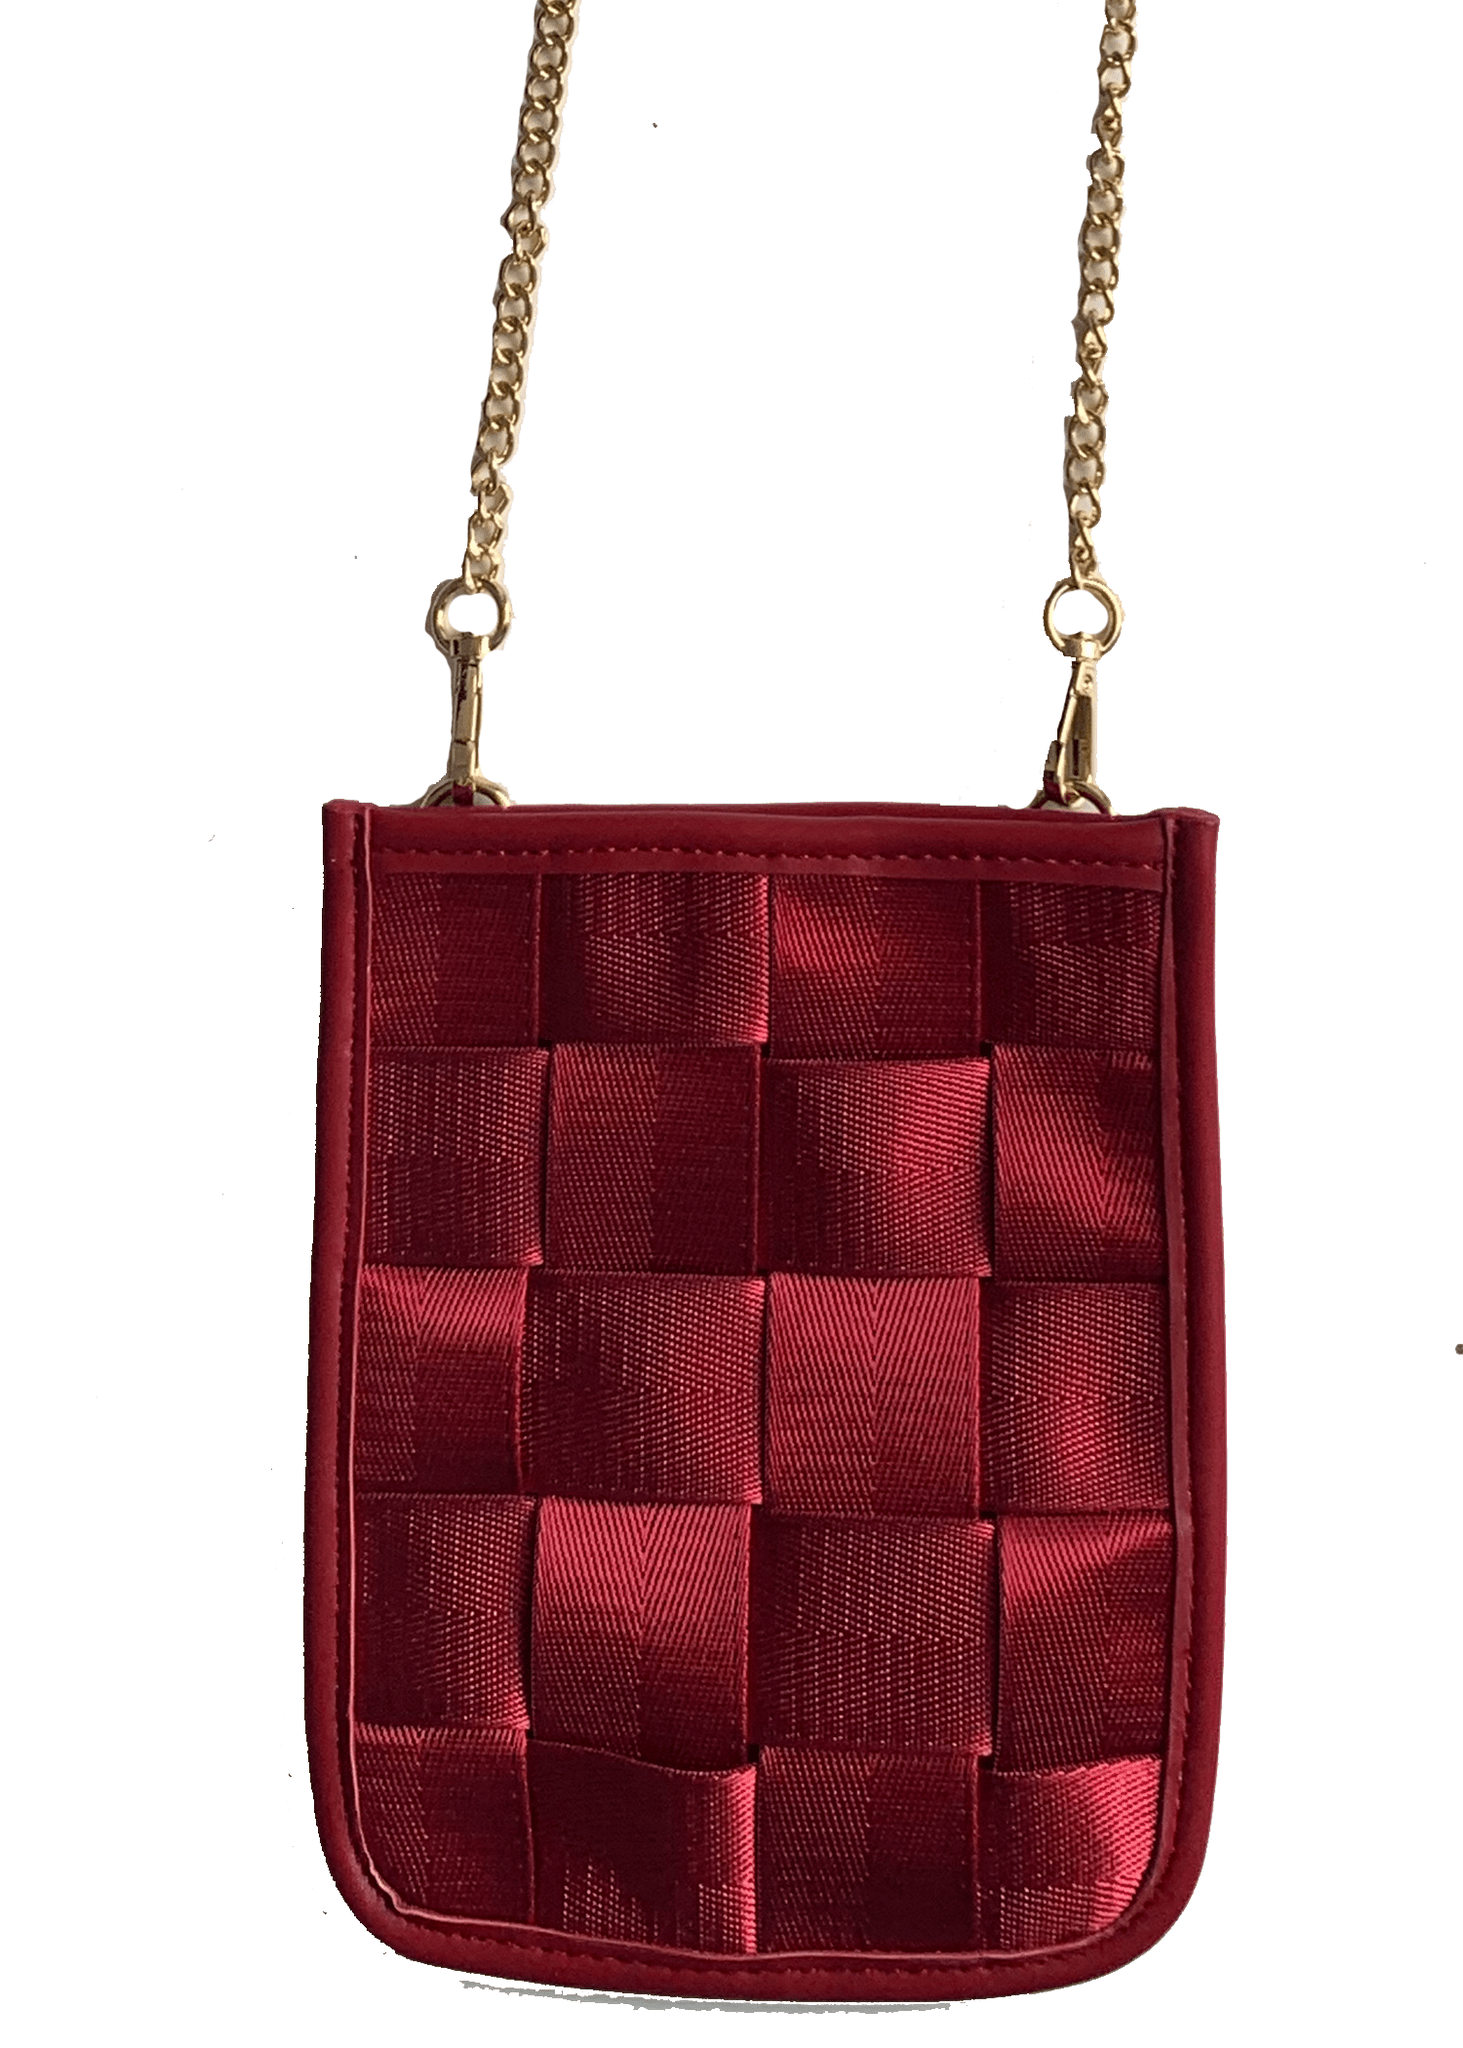 Ahdorned Small Woven Body Bag w/Chain - Assorted Colors at Lowest Online Price at ShopTheAddison.com